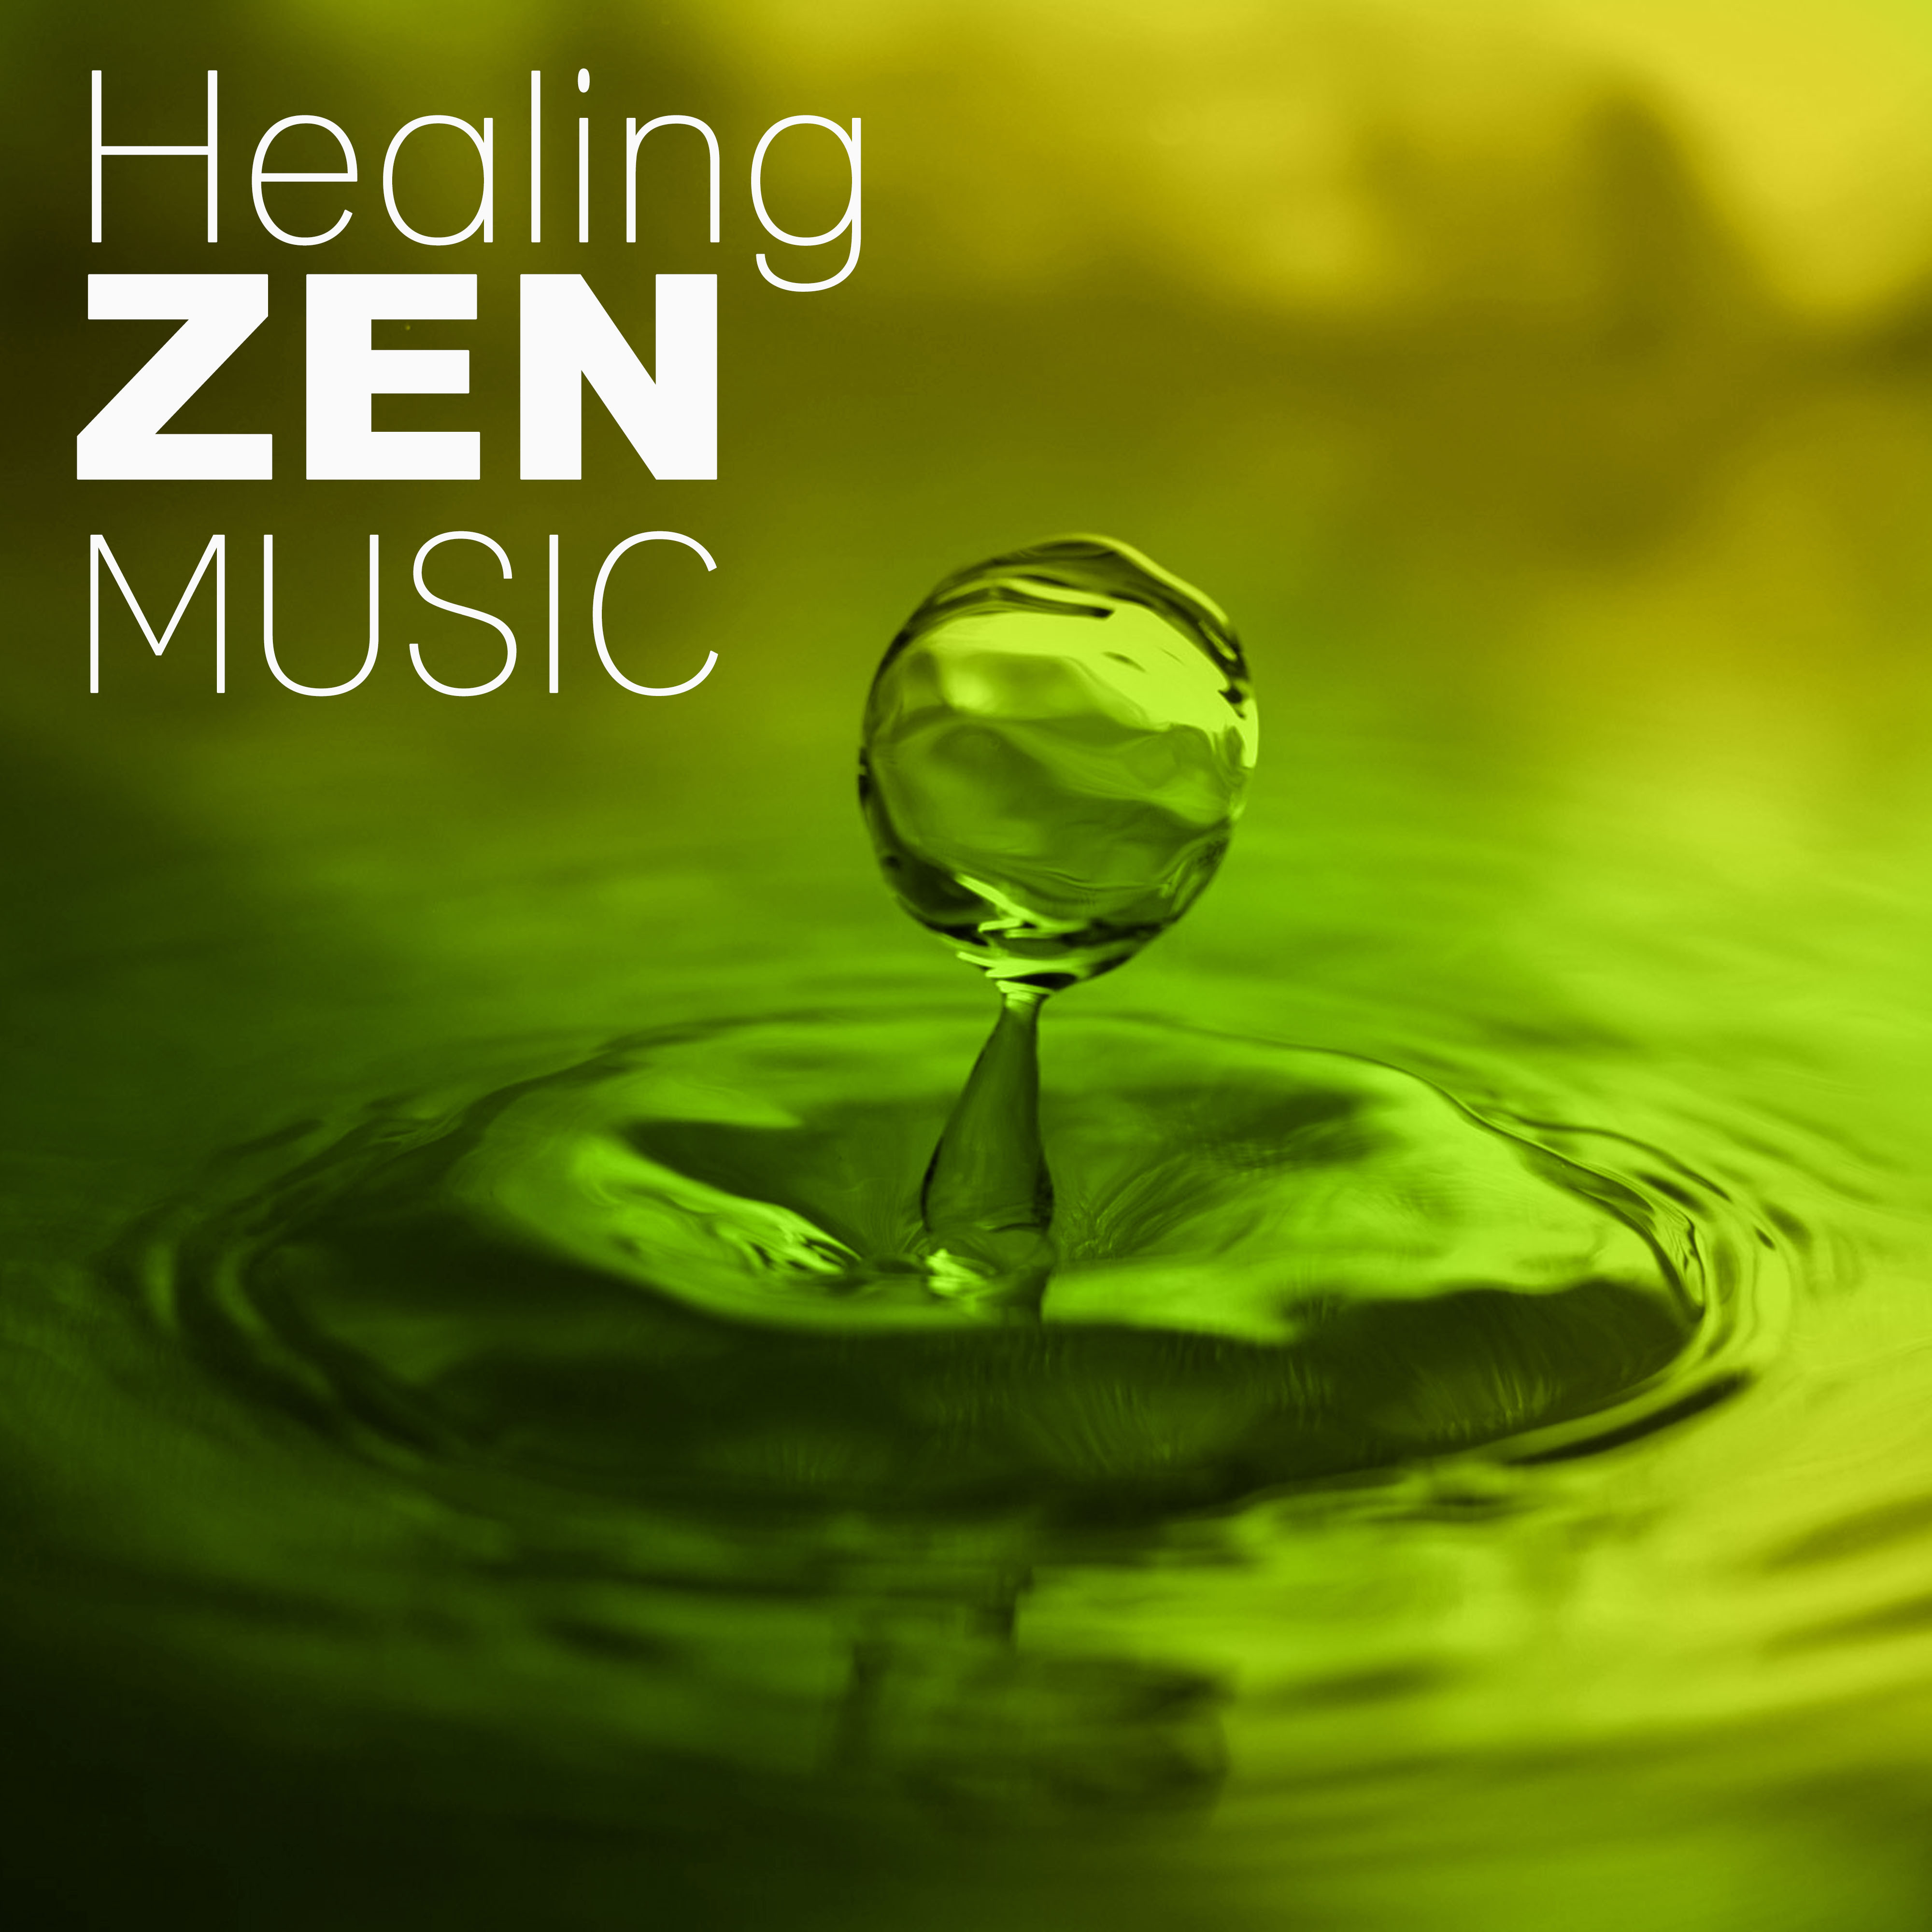 Healing Zen Music - Yoga Music, Meditation Relaxation, Nature Sounds, New Age Instrumental, Spa, Massage and Well Being